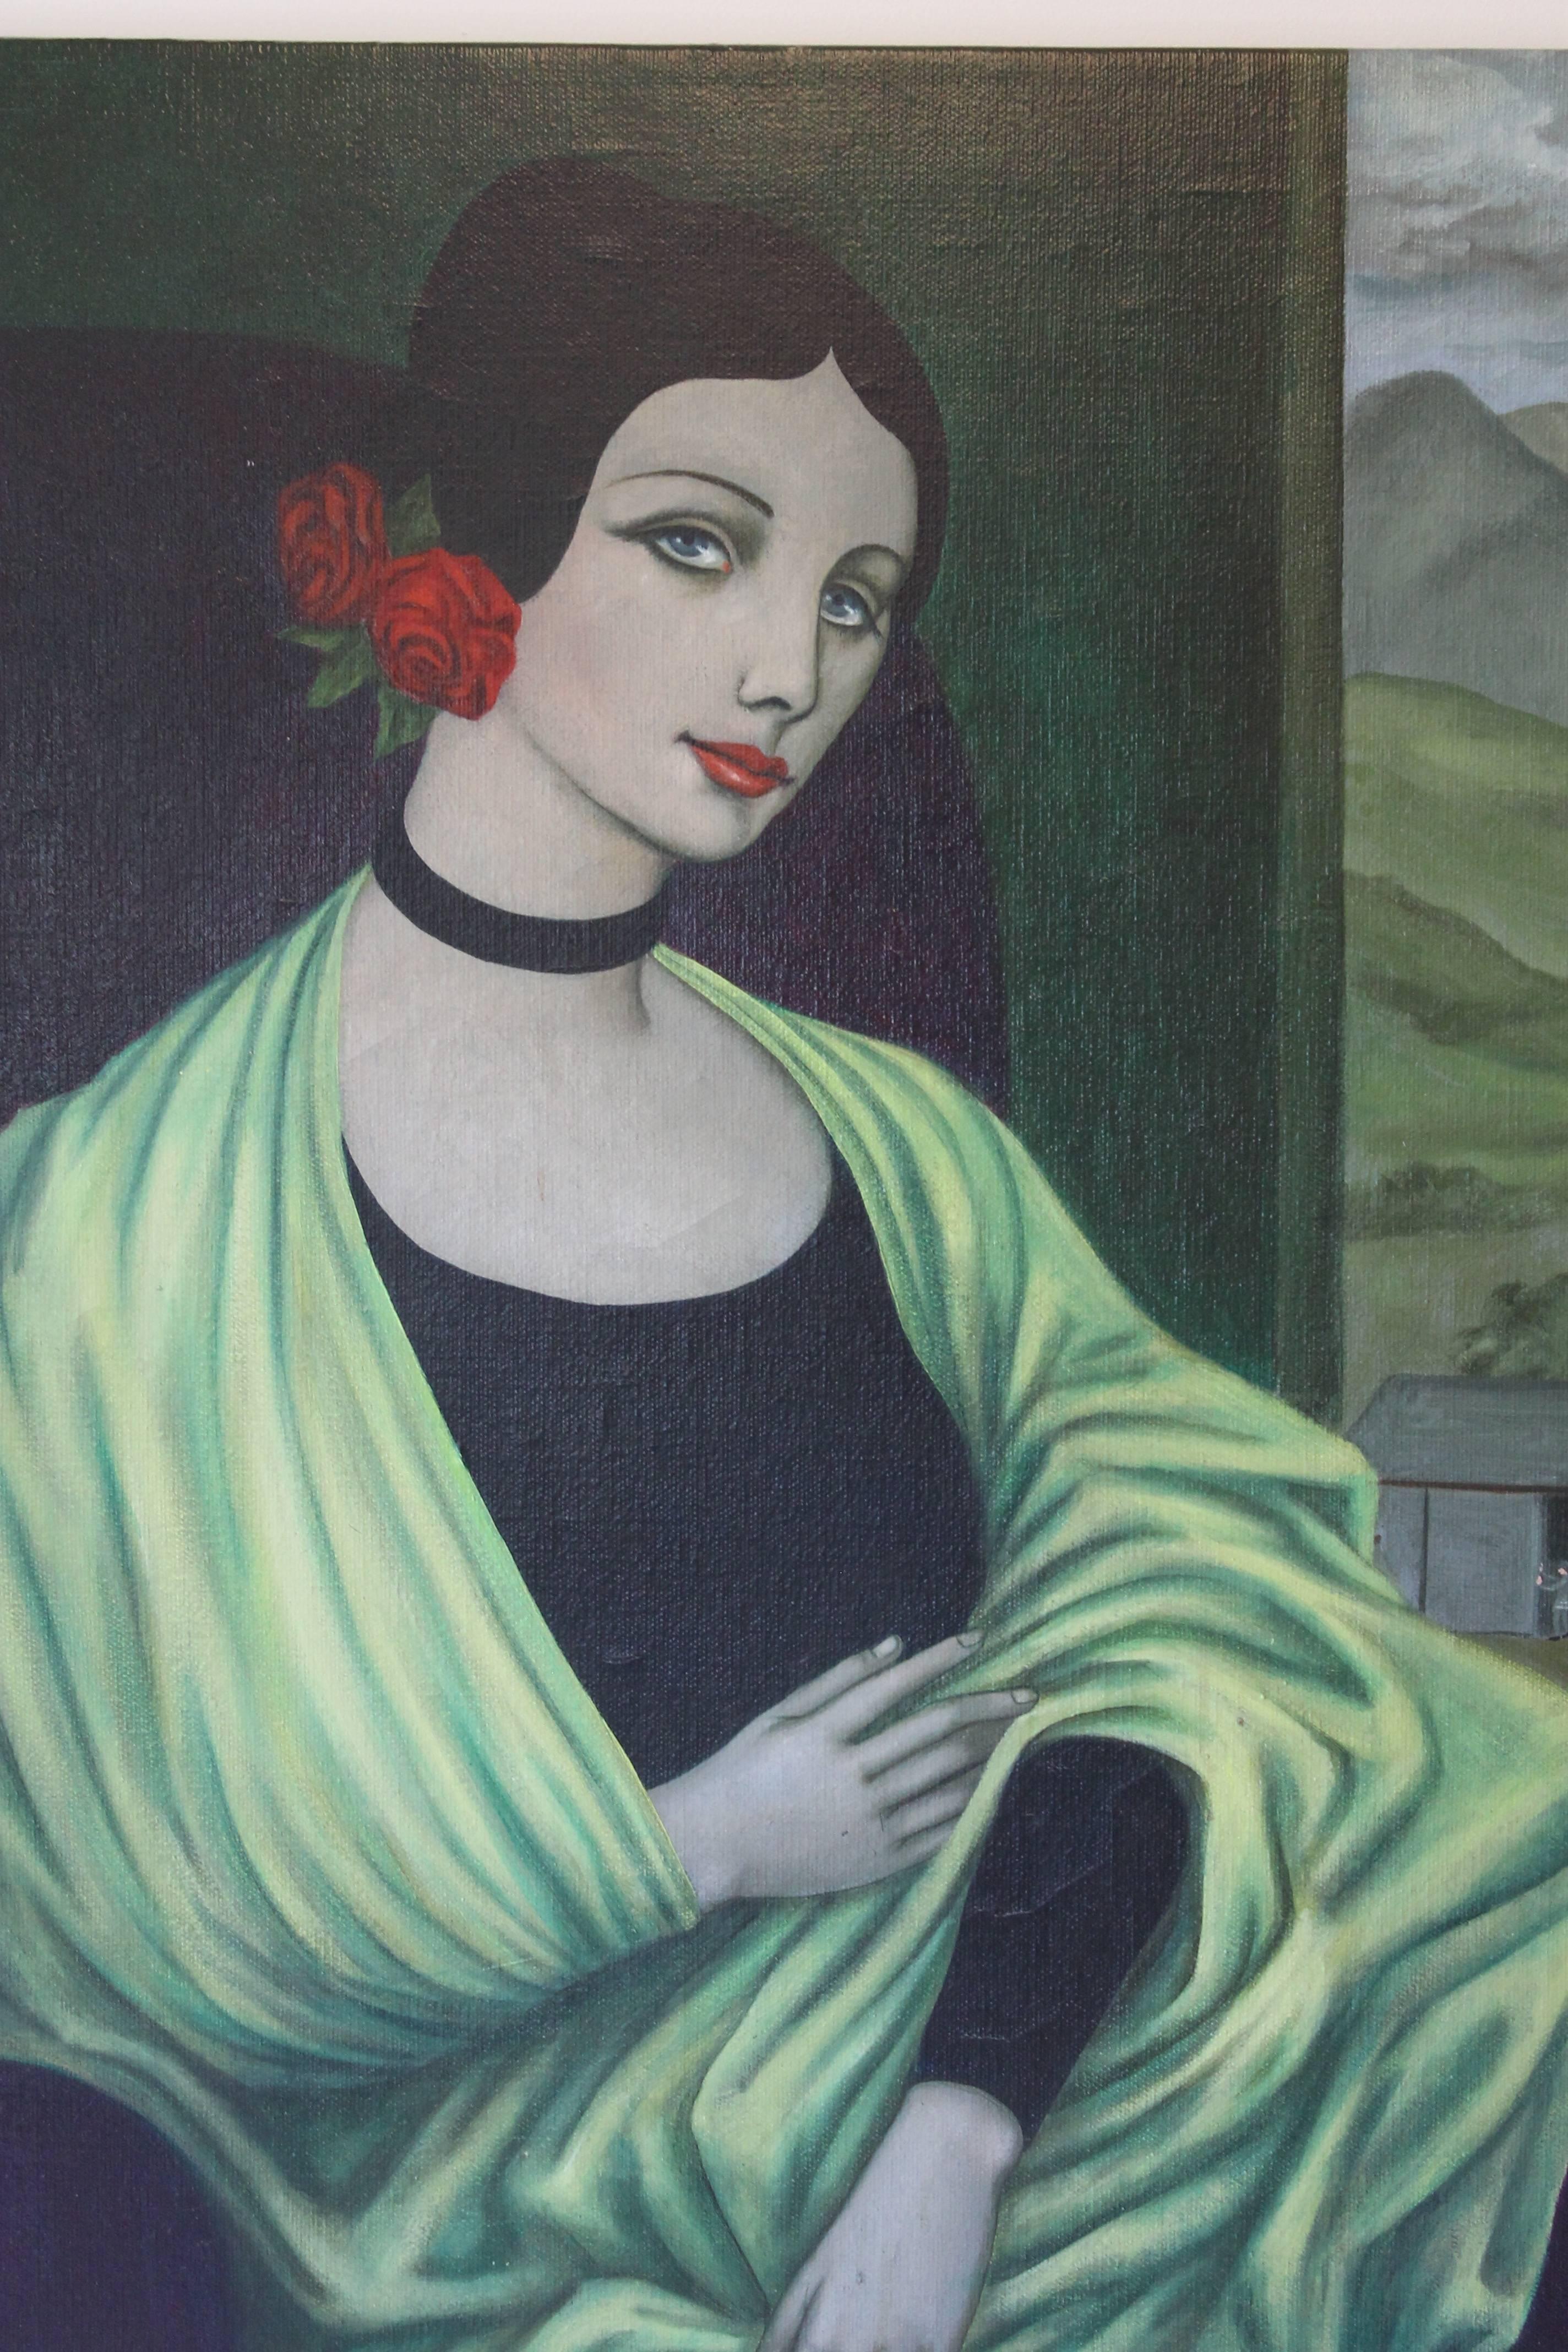 Beautiful oil painting on canvas of woman by Alexander c. Anderson. Dated 1979. Unframed it measures 28